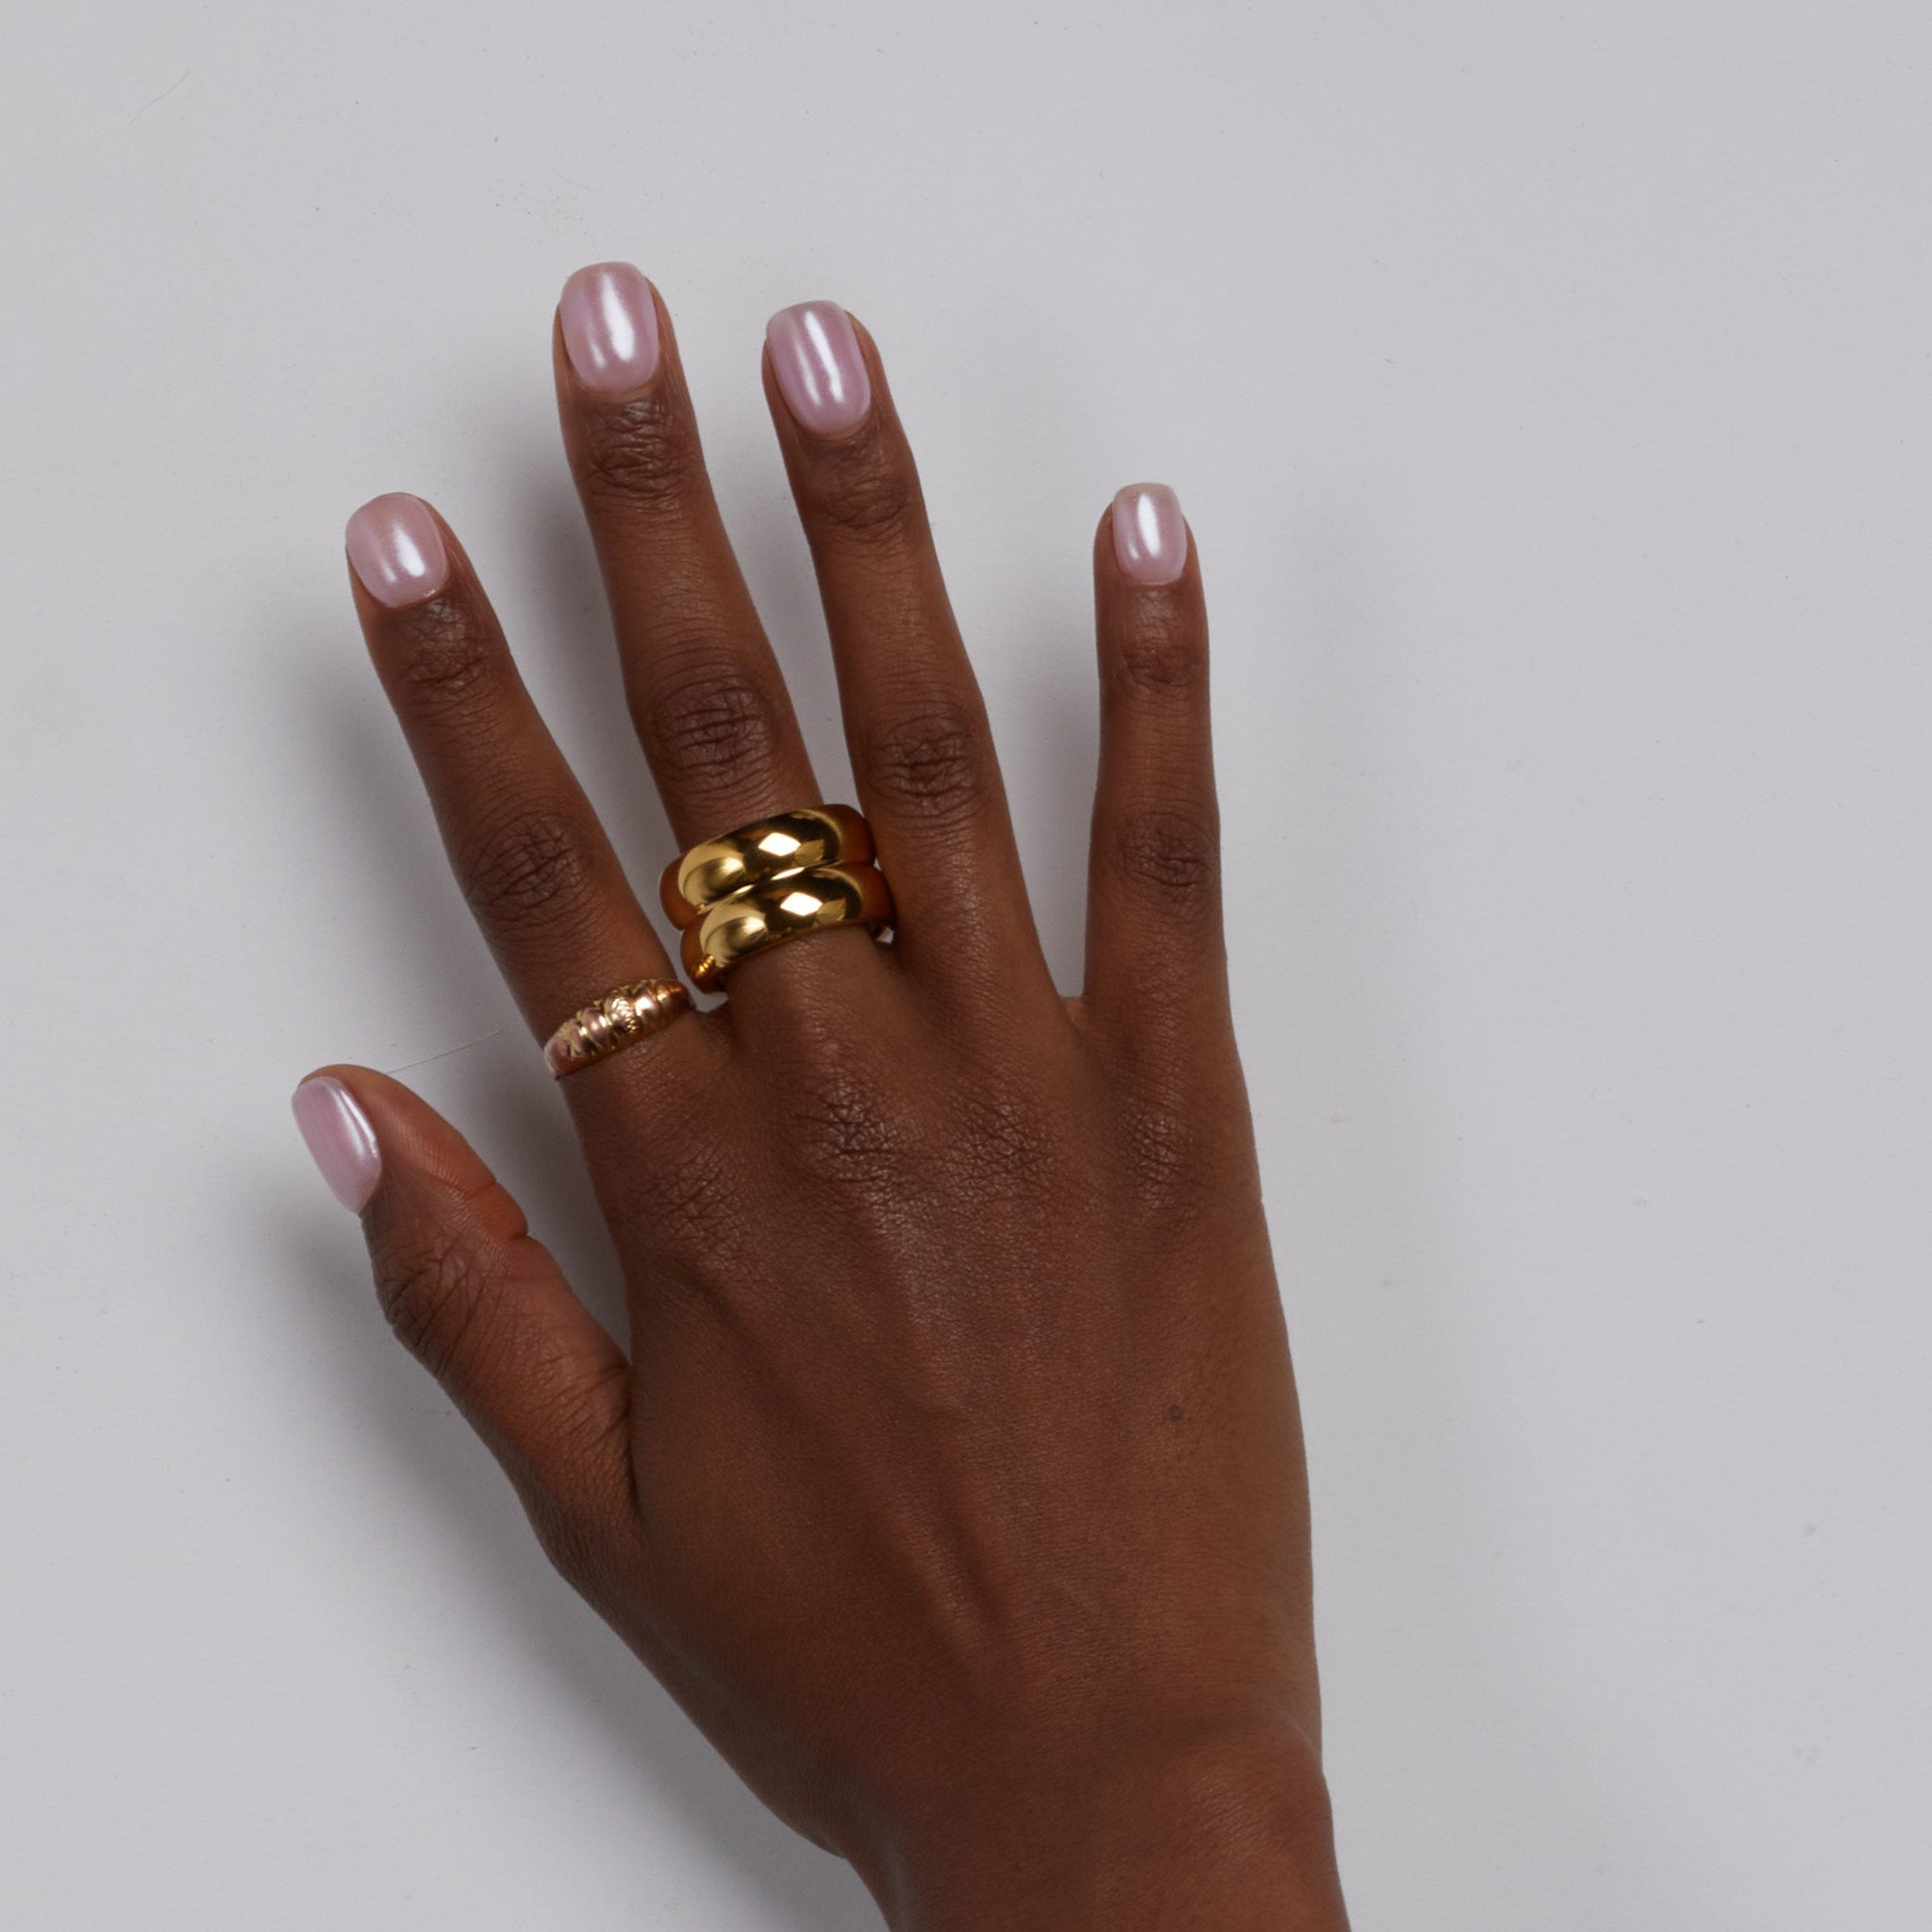 Hand wearing chunky gold rings